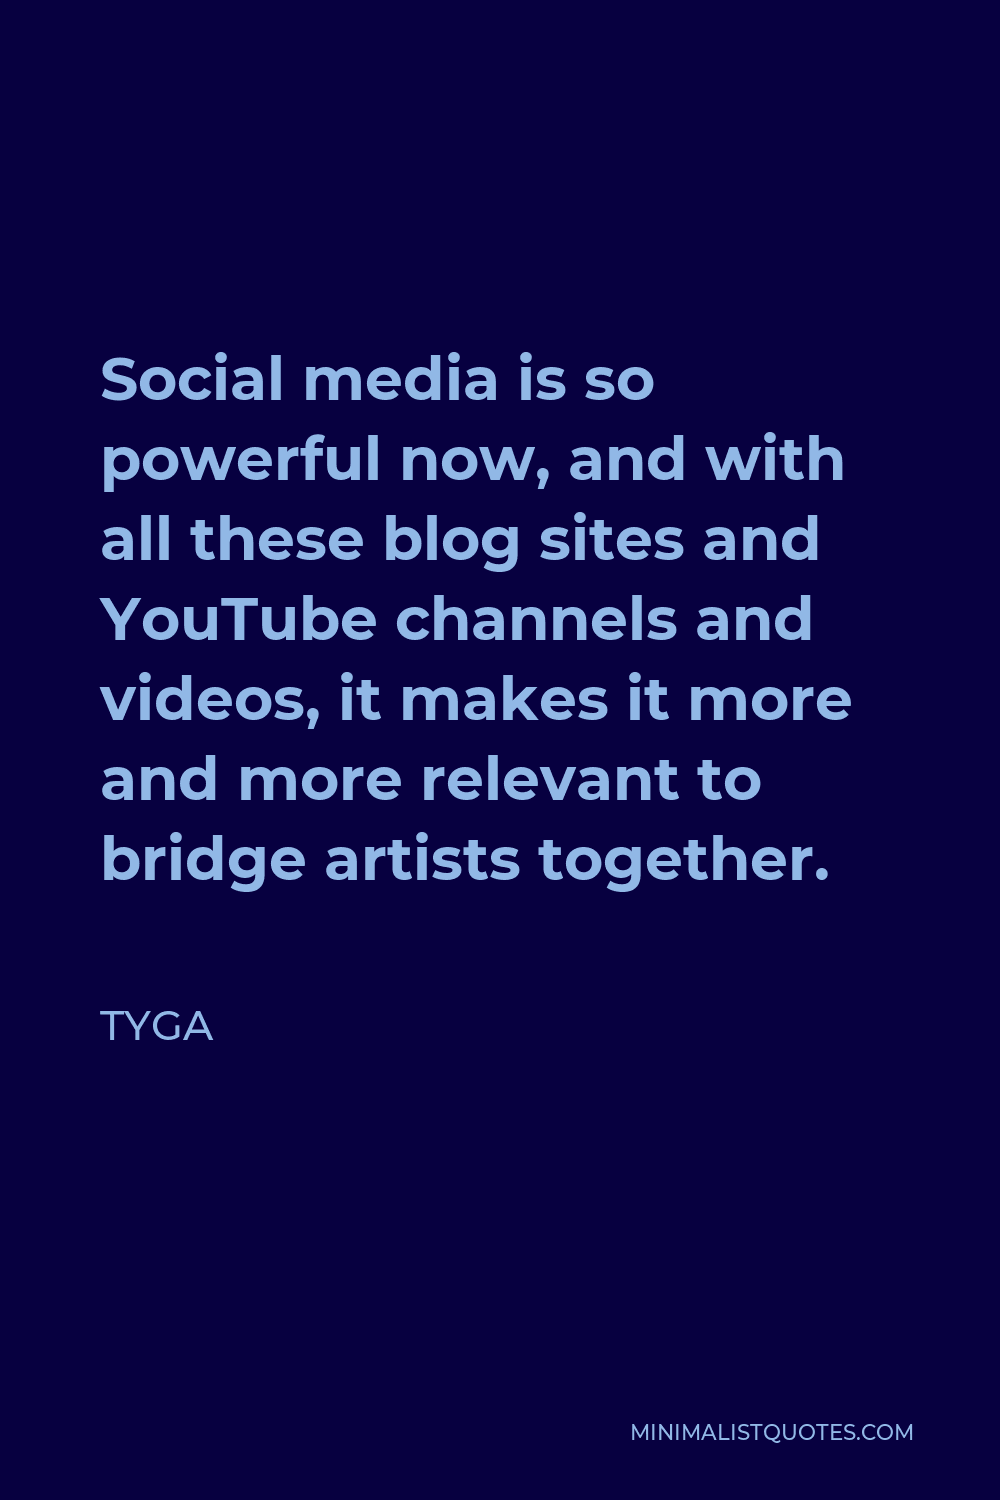 Tyga Quote - Social media is so powerful now, and with all these blog sites and YouTube channels and videos, it makes it more and more relevant to bridge artists together.